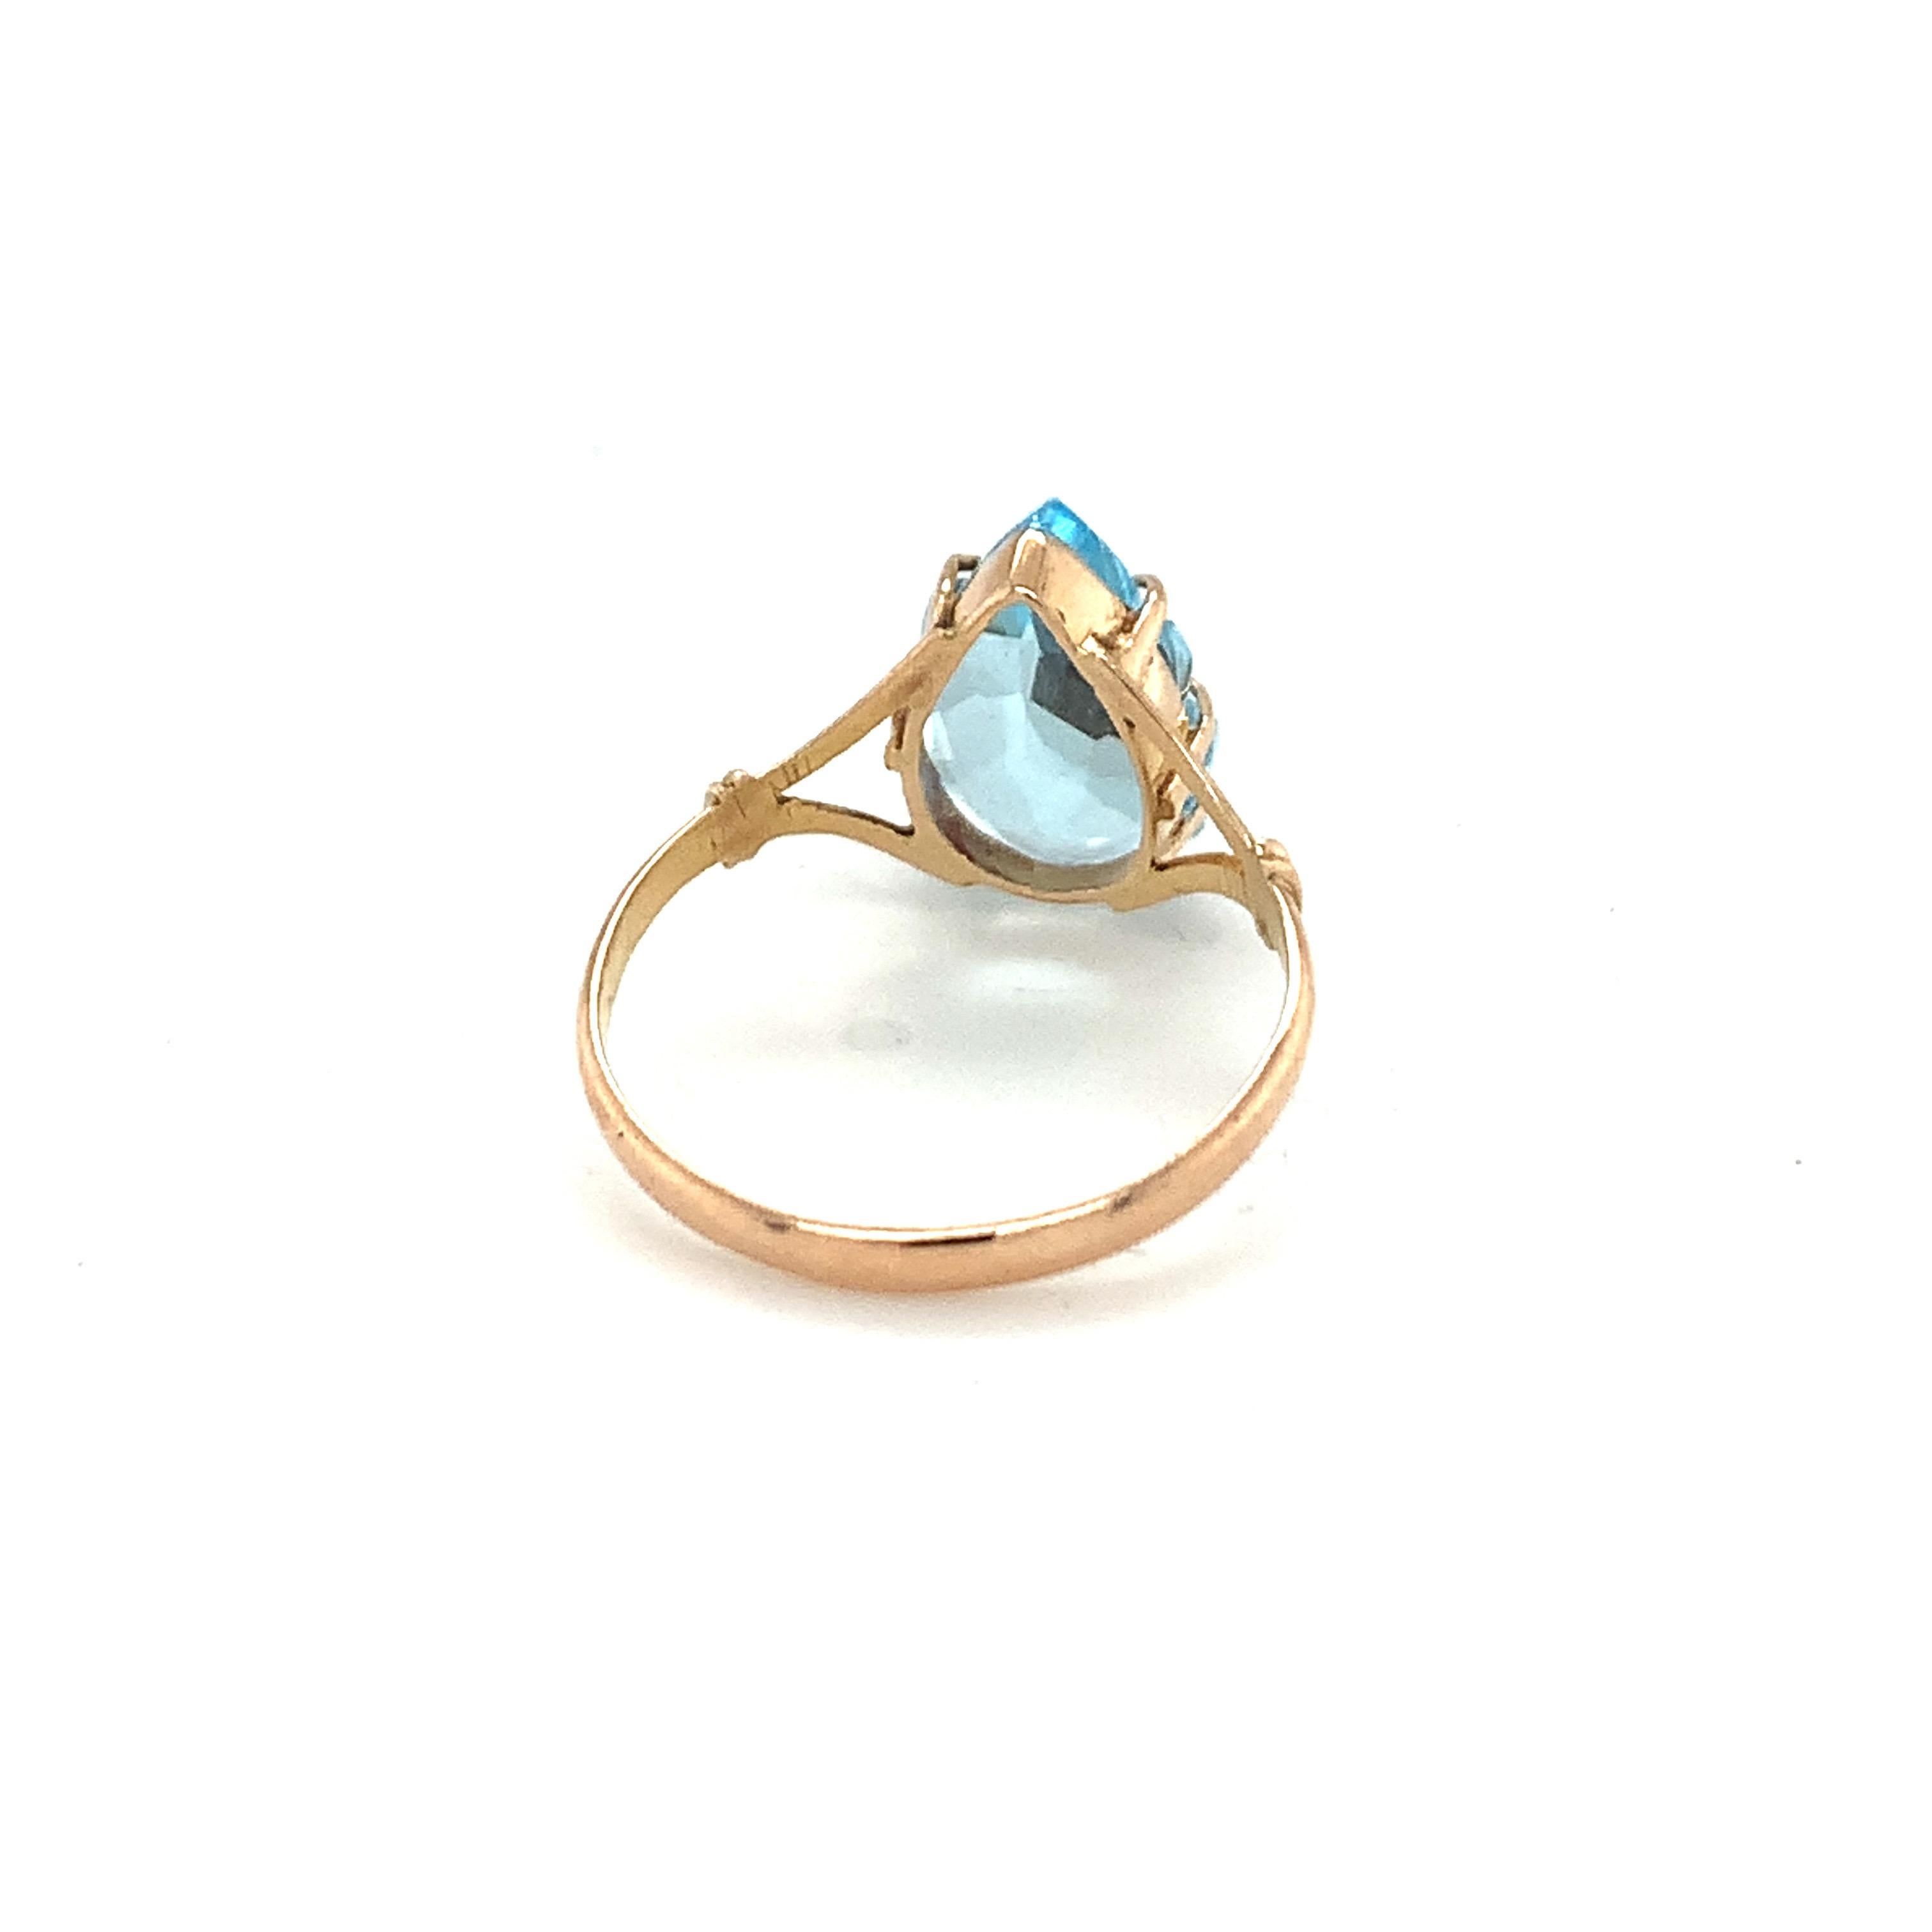 Tear Drop Blue Topaz Ring Set in 14k Yellow Gold For Sale 3